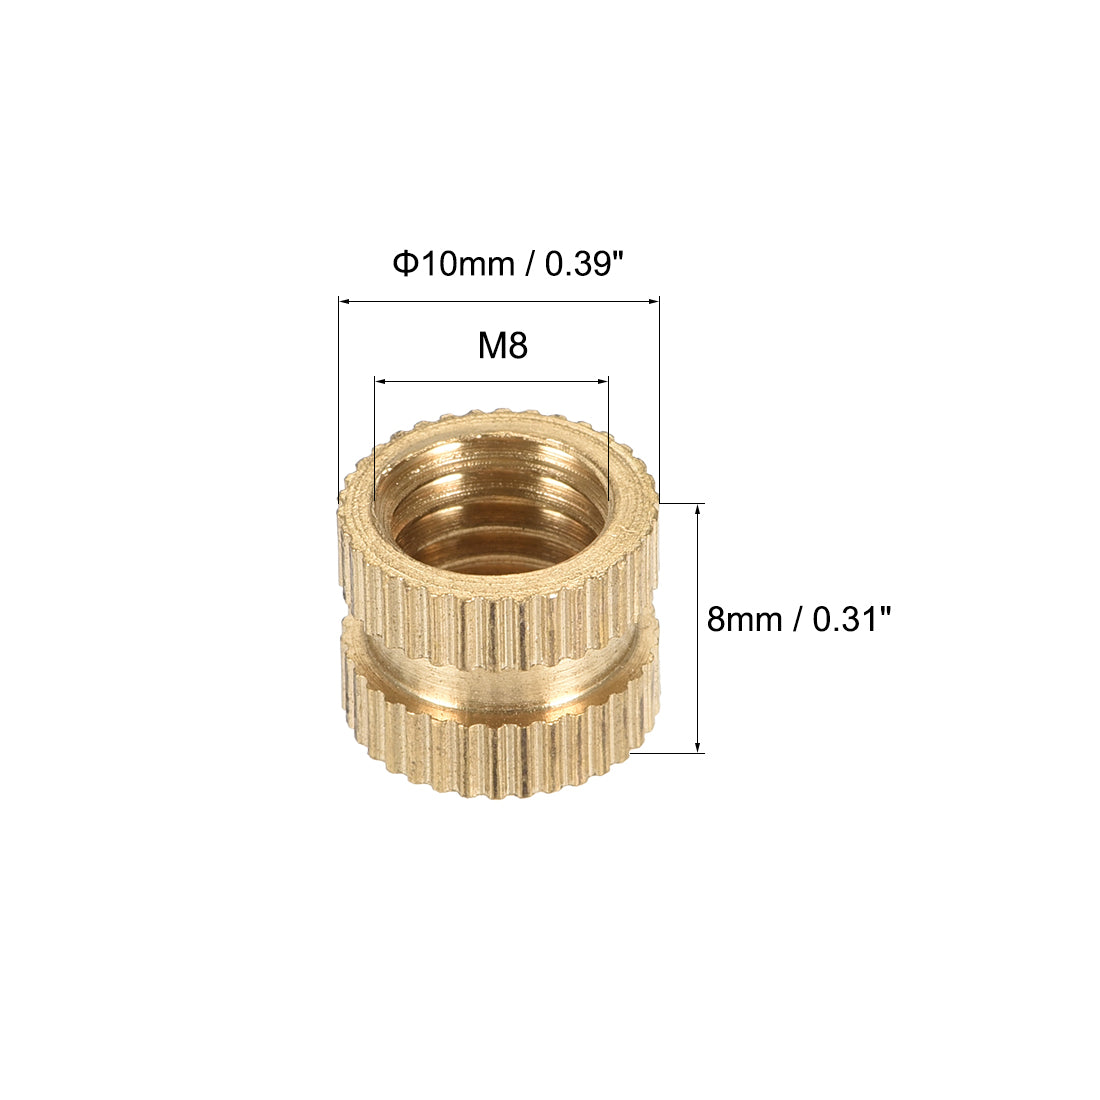 uxcell Uxcell M8x1.25mm Female Brass Knurled Threaded Insert Embedment Nut for 3D Printer, 25Pcs